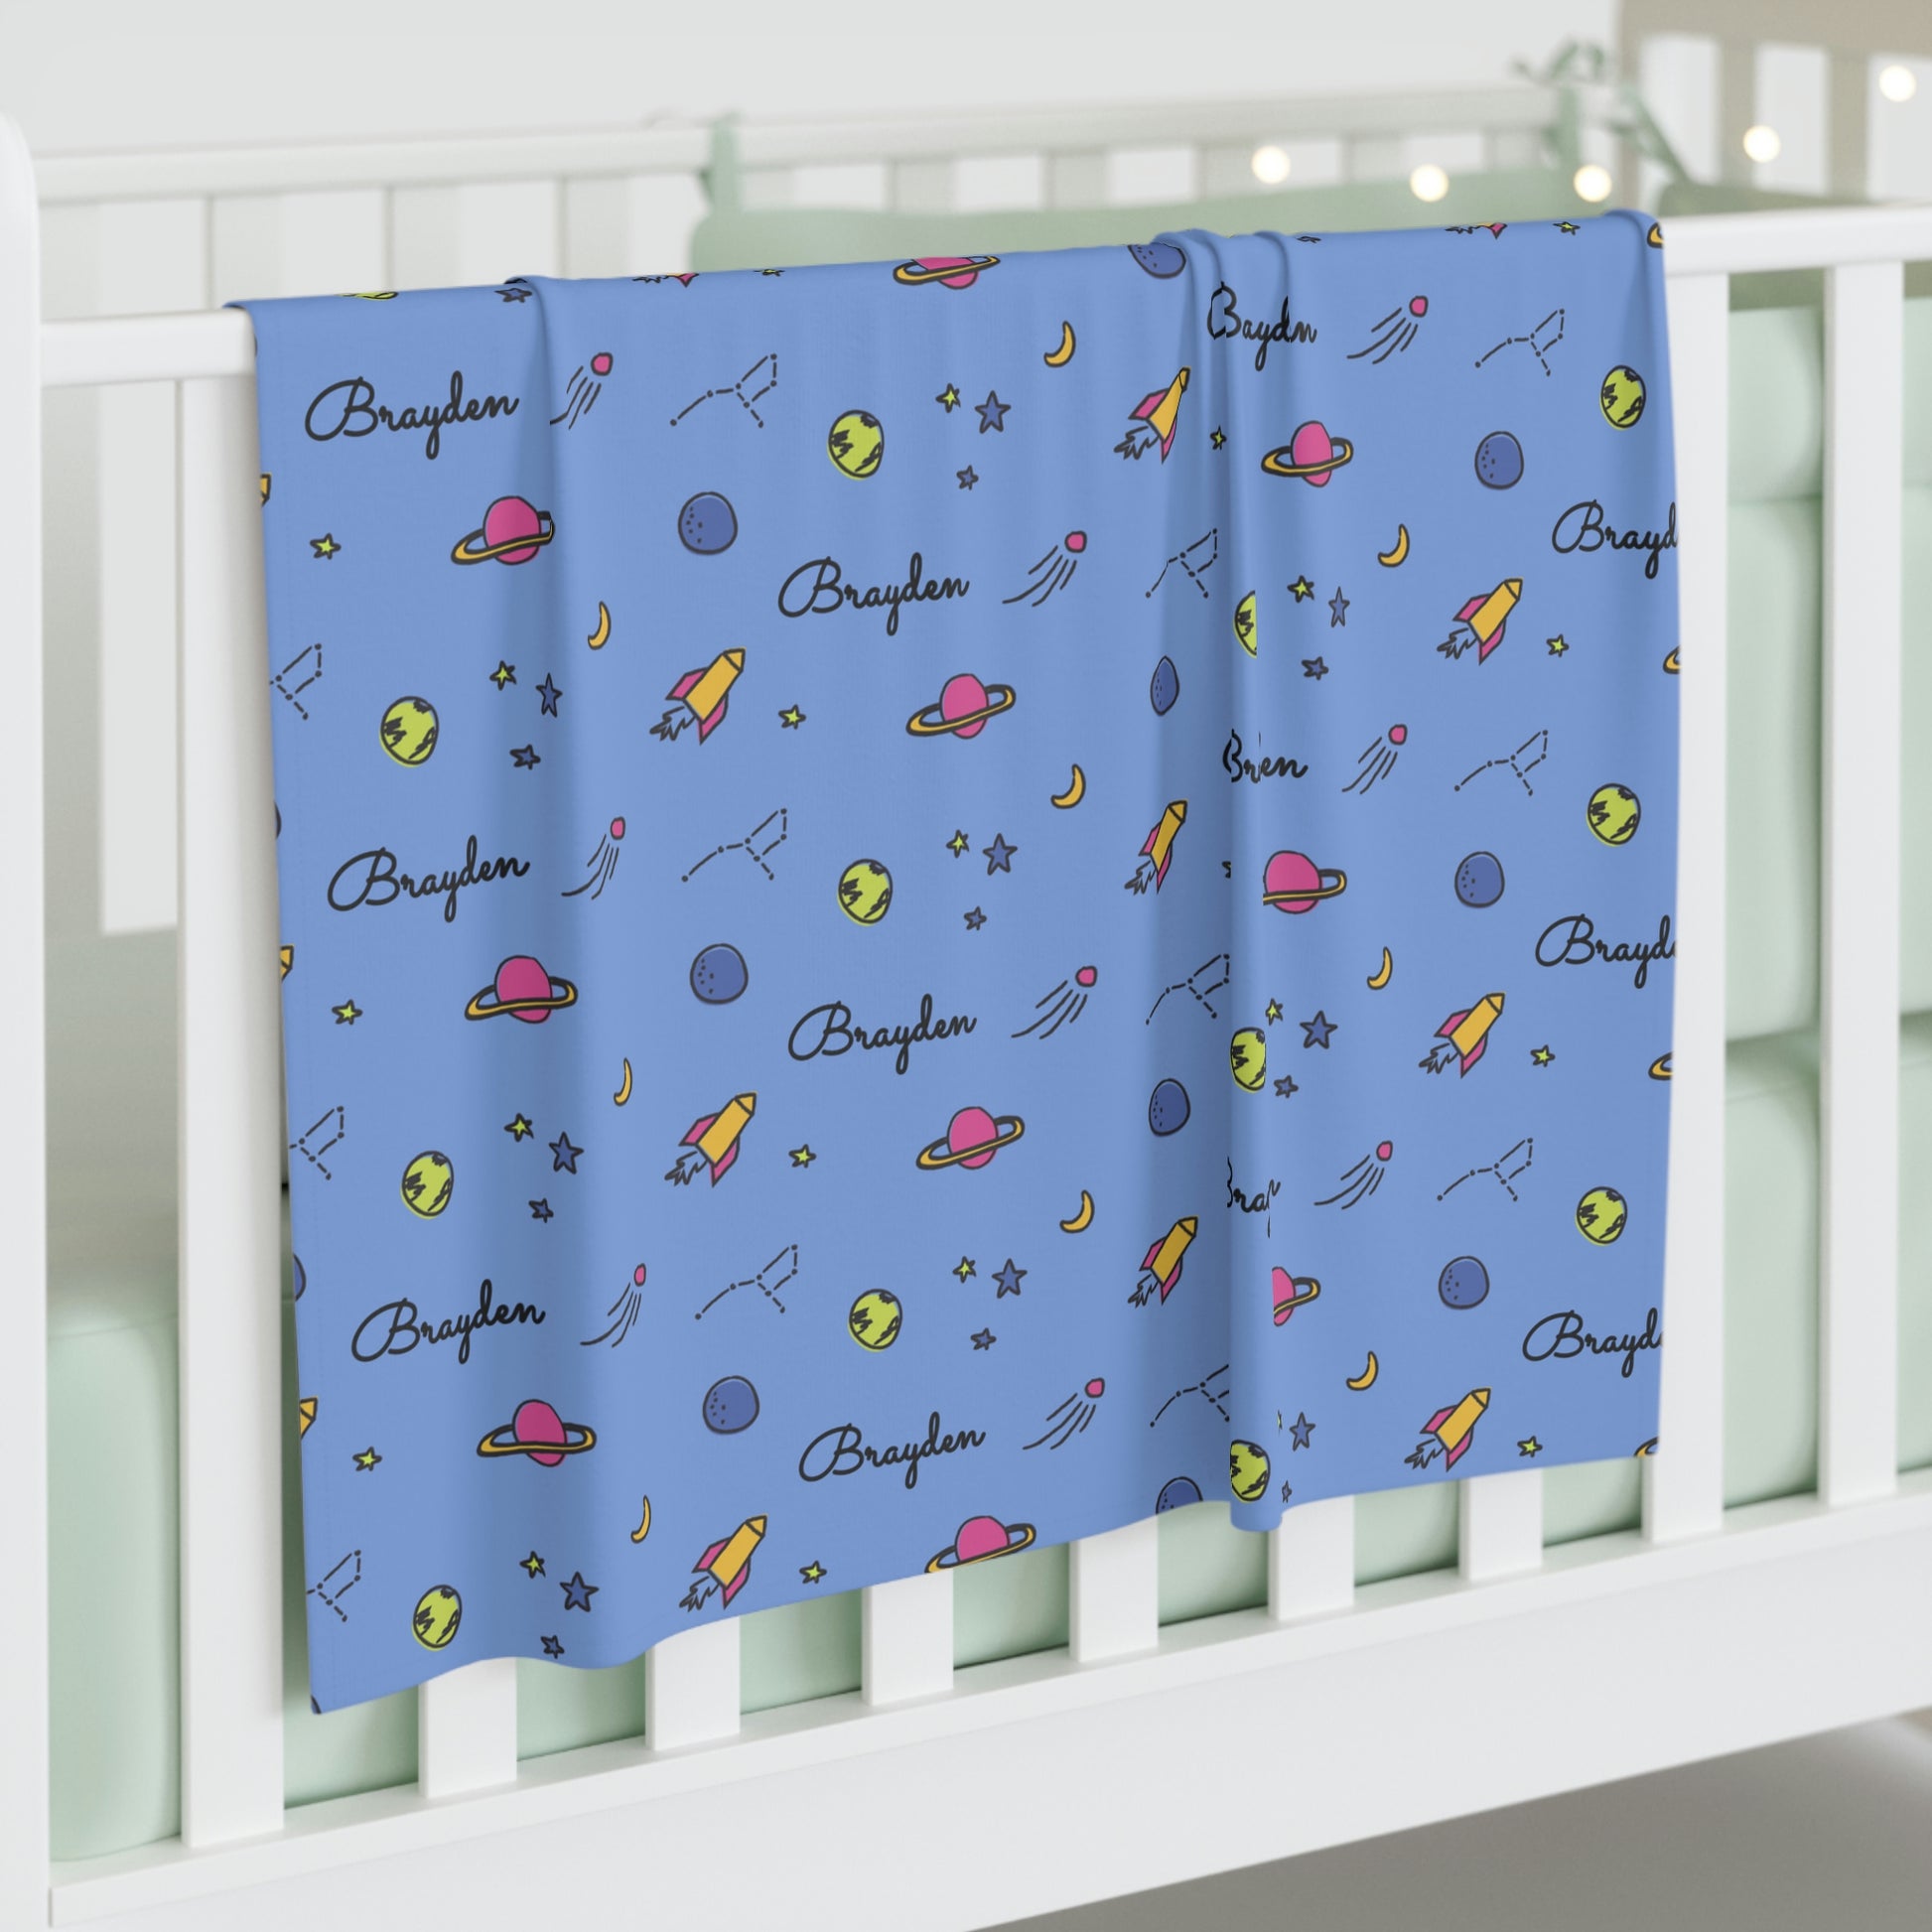 Jersey personalized baby blanket in space, rocket and stars pattern hung over side of white crib